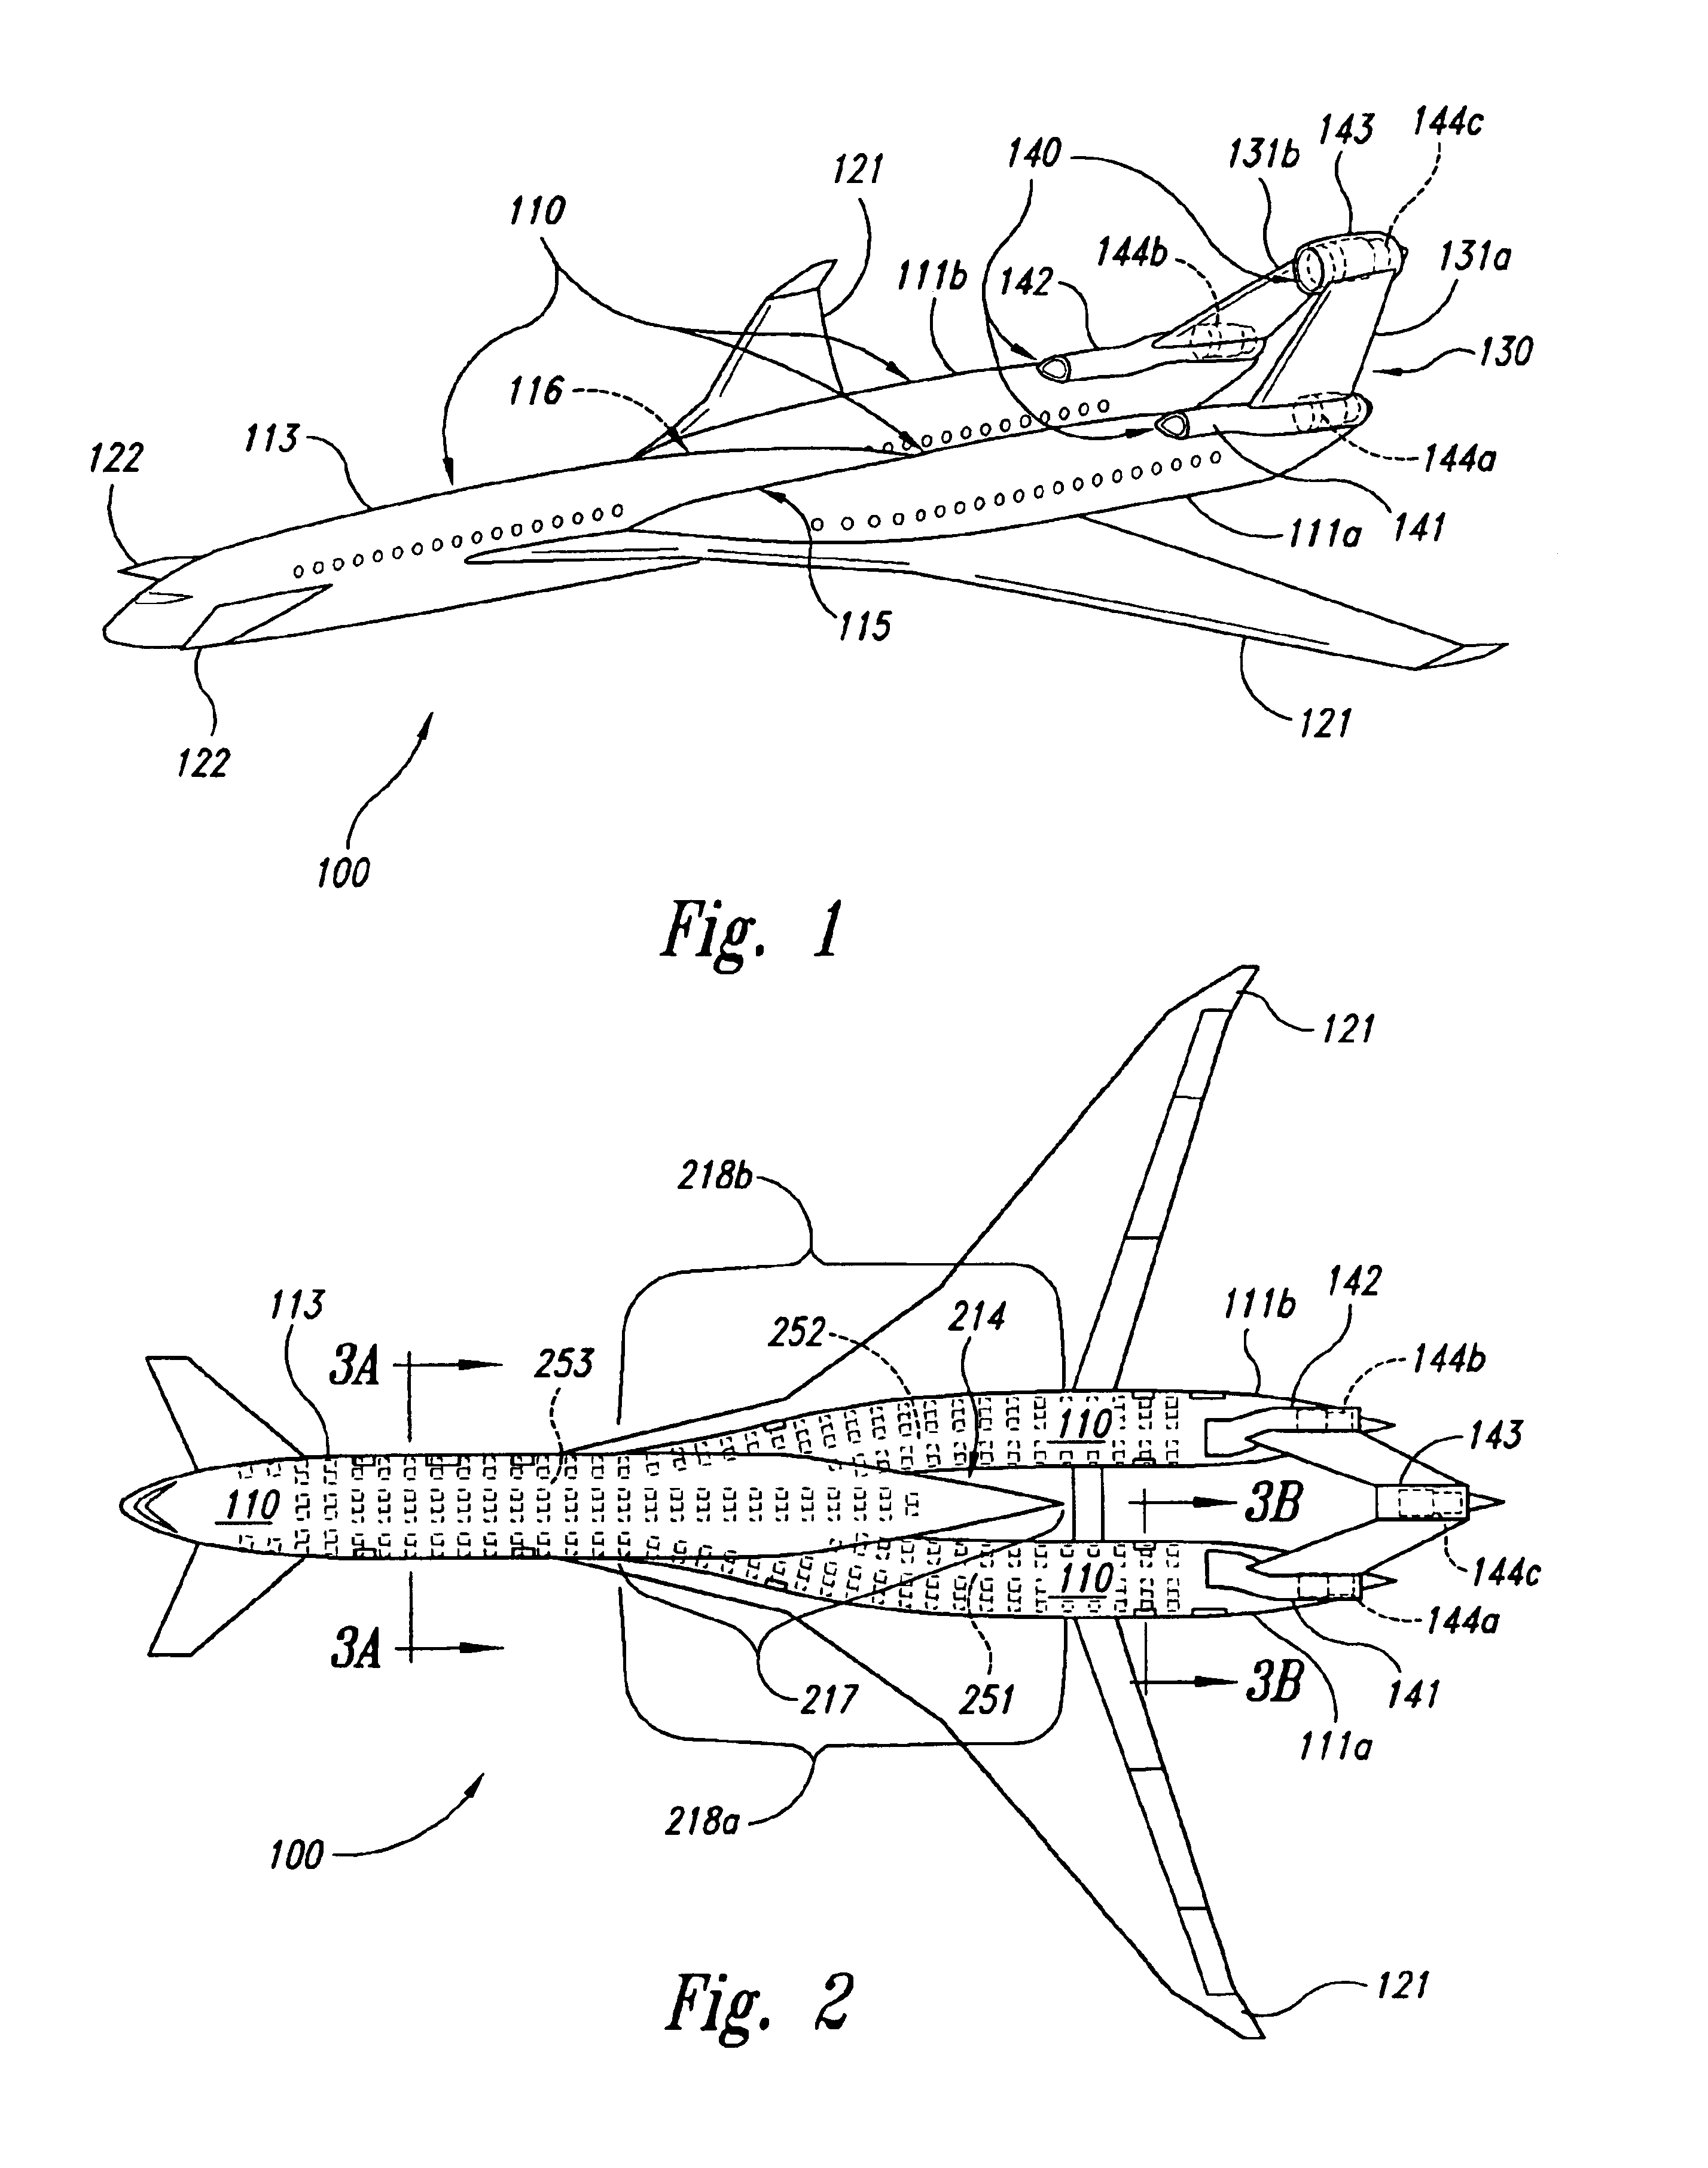 Tri-body aircraft and methods for their manufacture